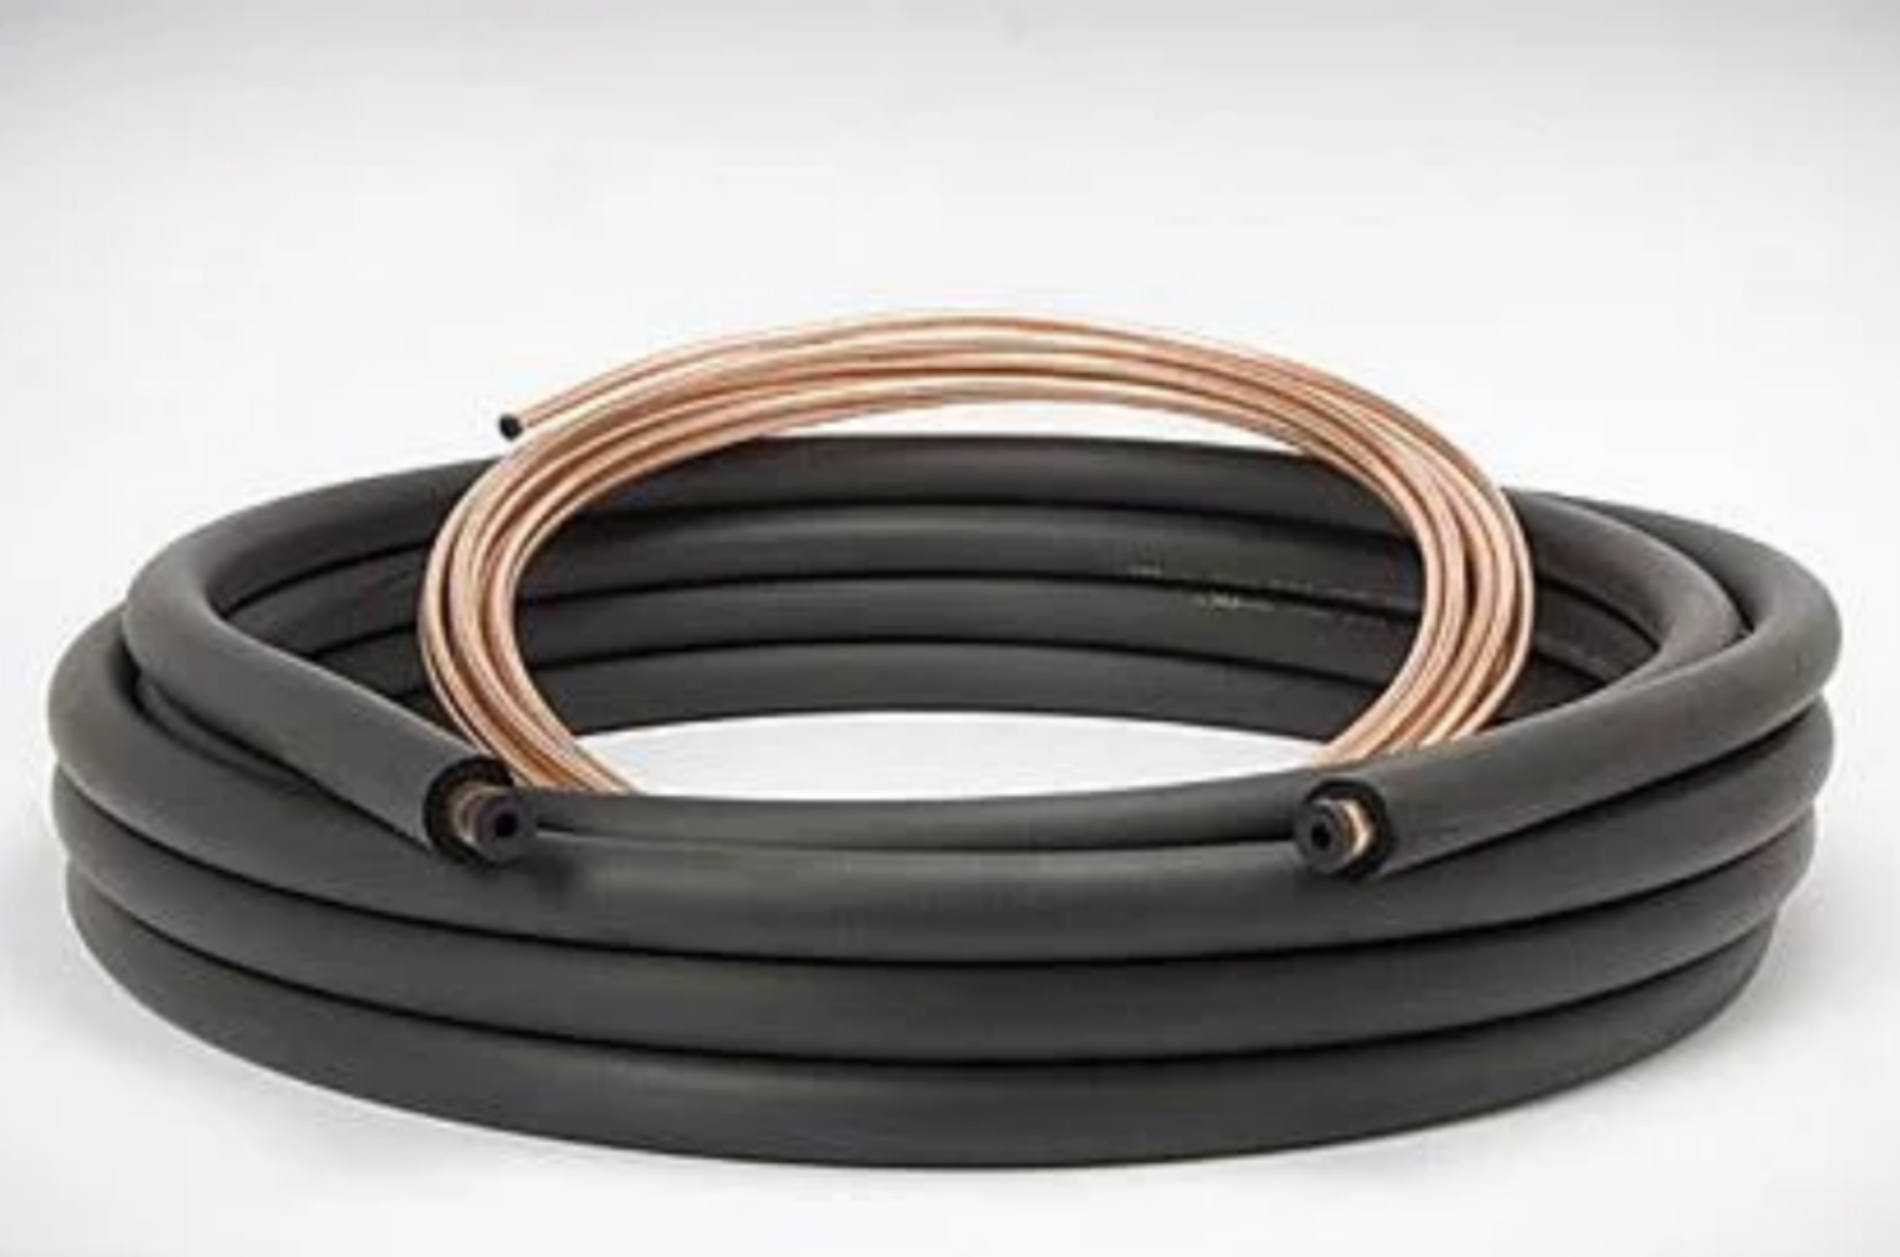 SOFT COPPER AIR CONDITIONING PIPE